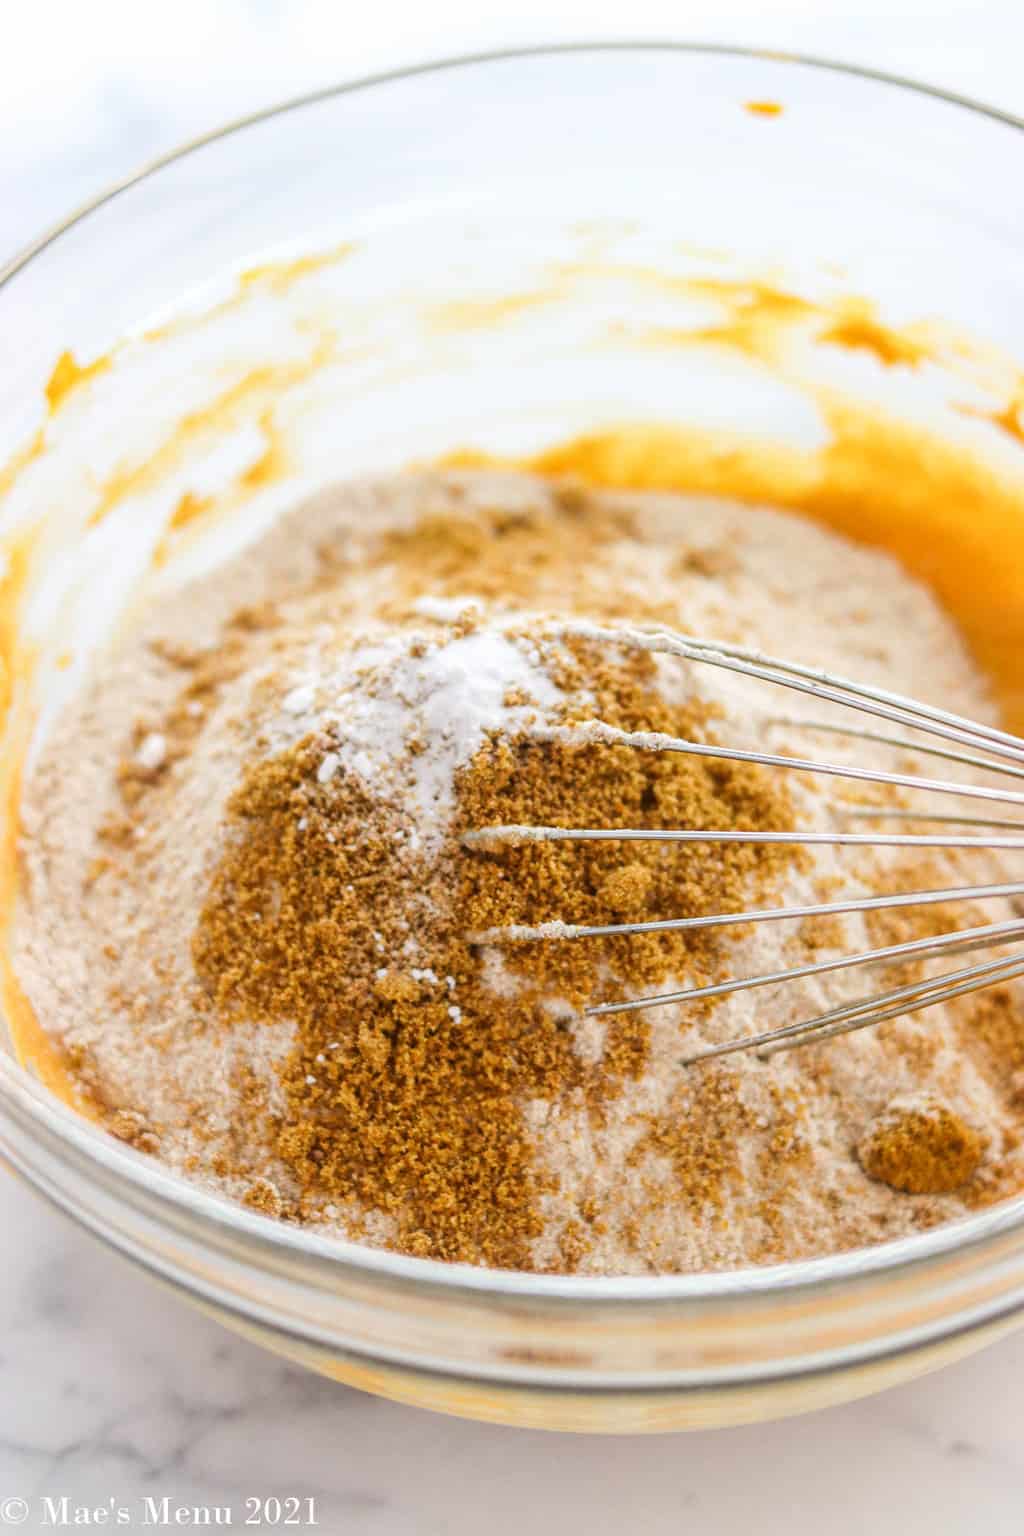 Flour, flaxseed, and baking soda in with the peanut butter and pumpkin mixture